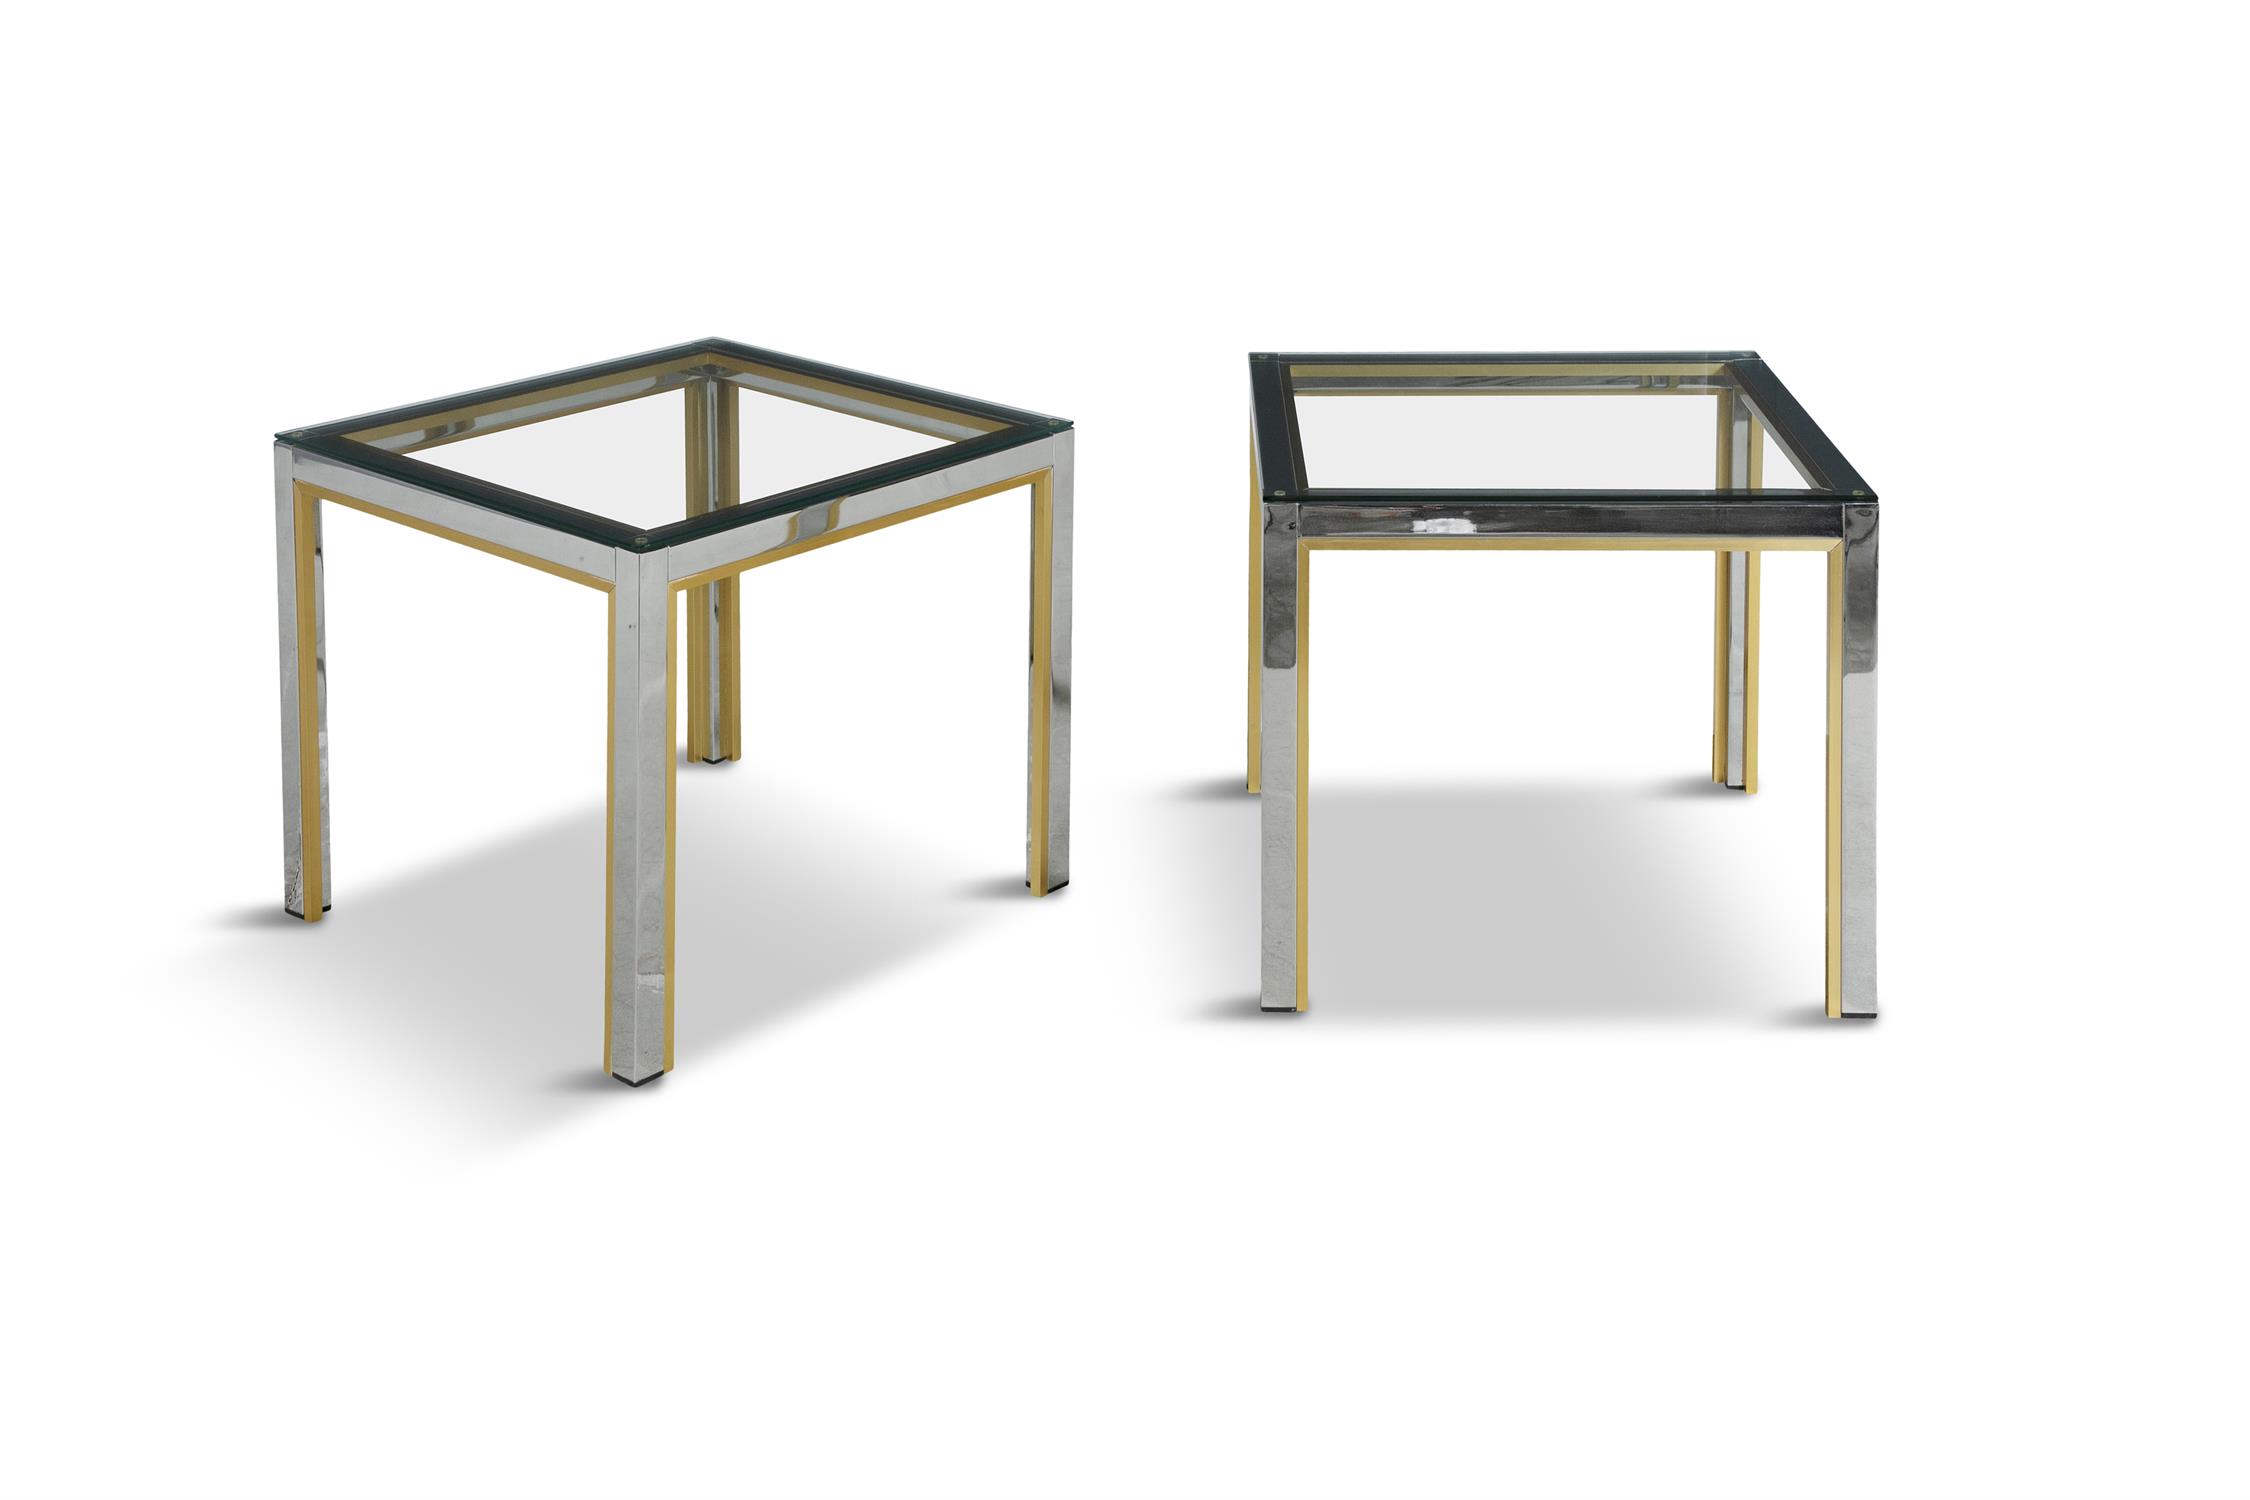 TABLES A pair of chrome and brass tables, attributed to Renato Zevi for Romeo Rega, with glass tops. - Image 3 of 4